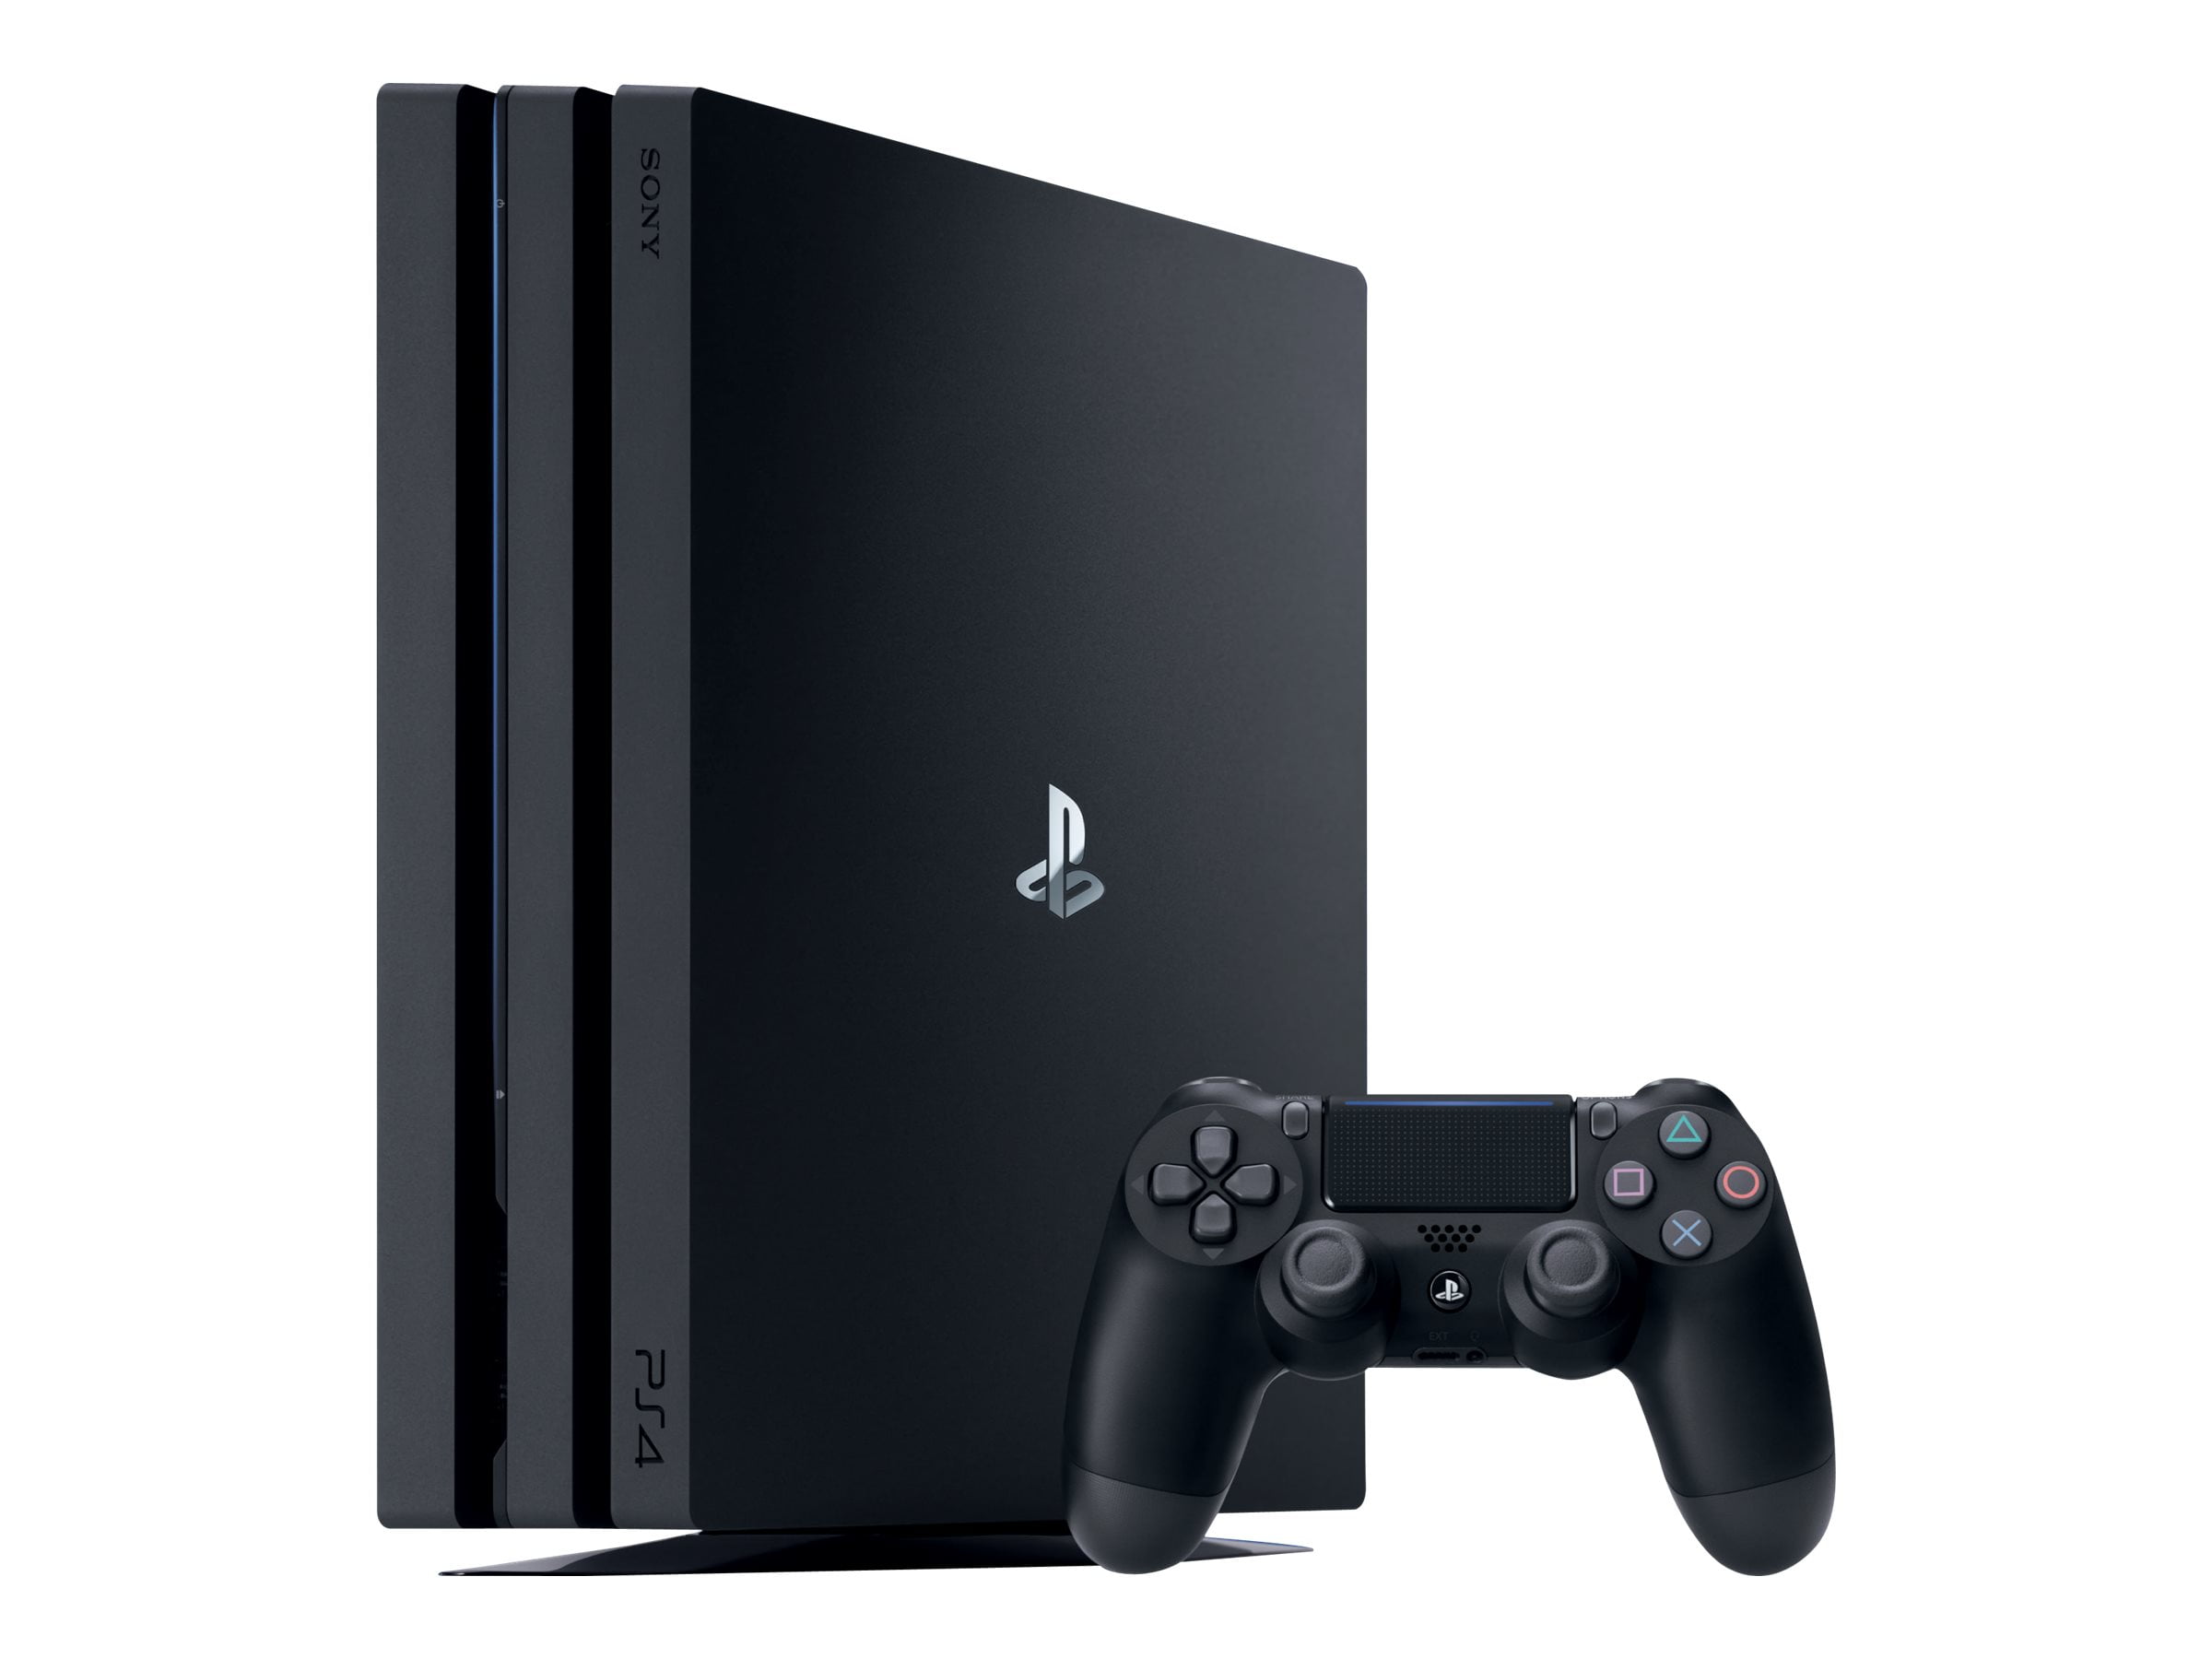 Sony PS4 Pro - 1TB HDD Game Console, 4K HDR, Jet Black - Walmart.com